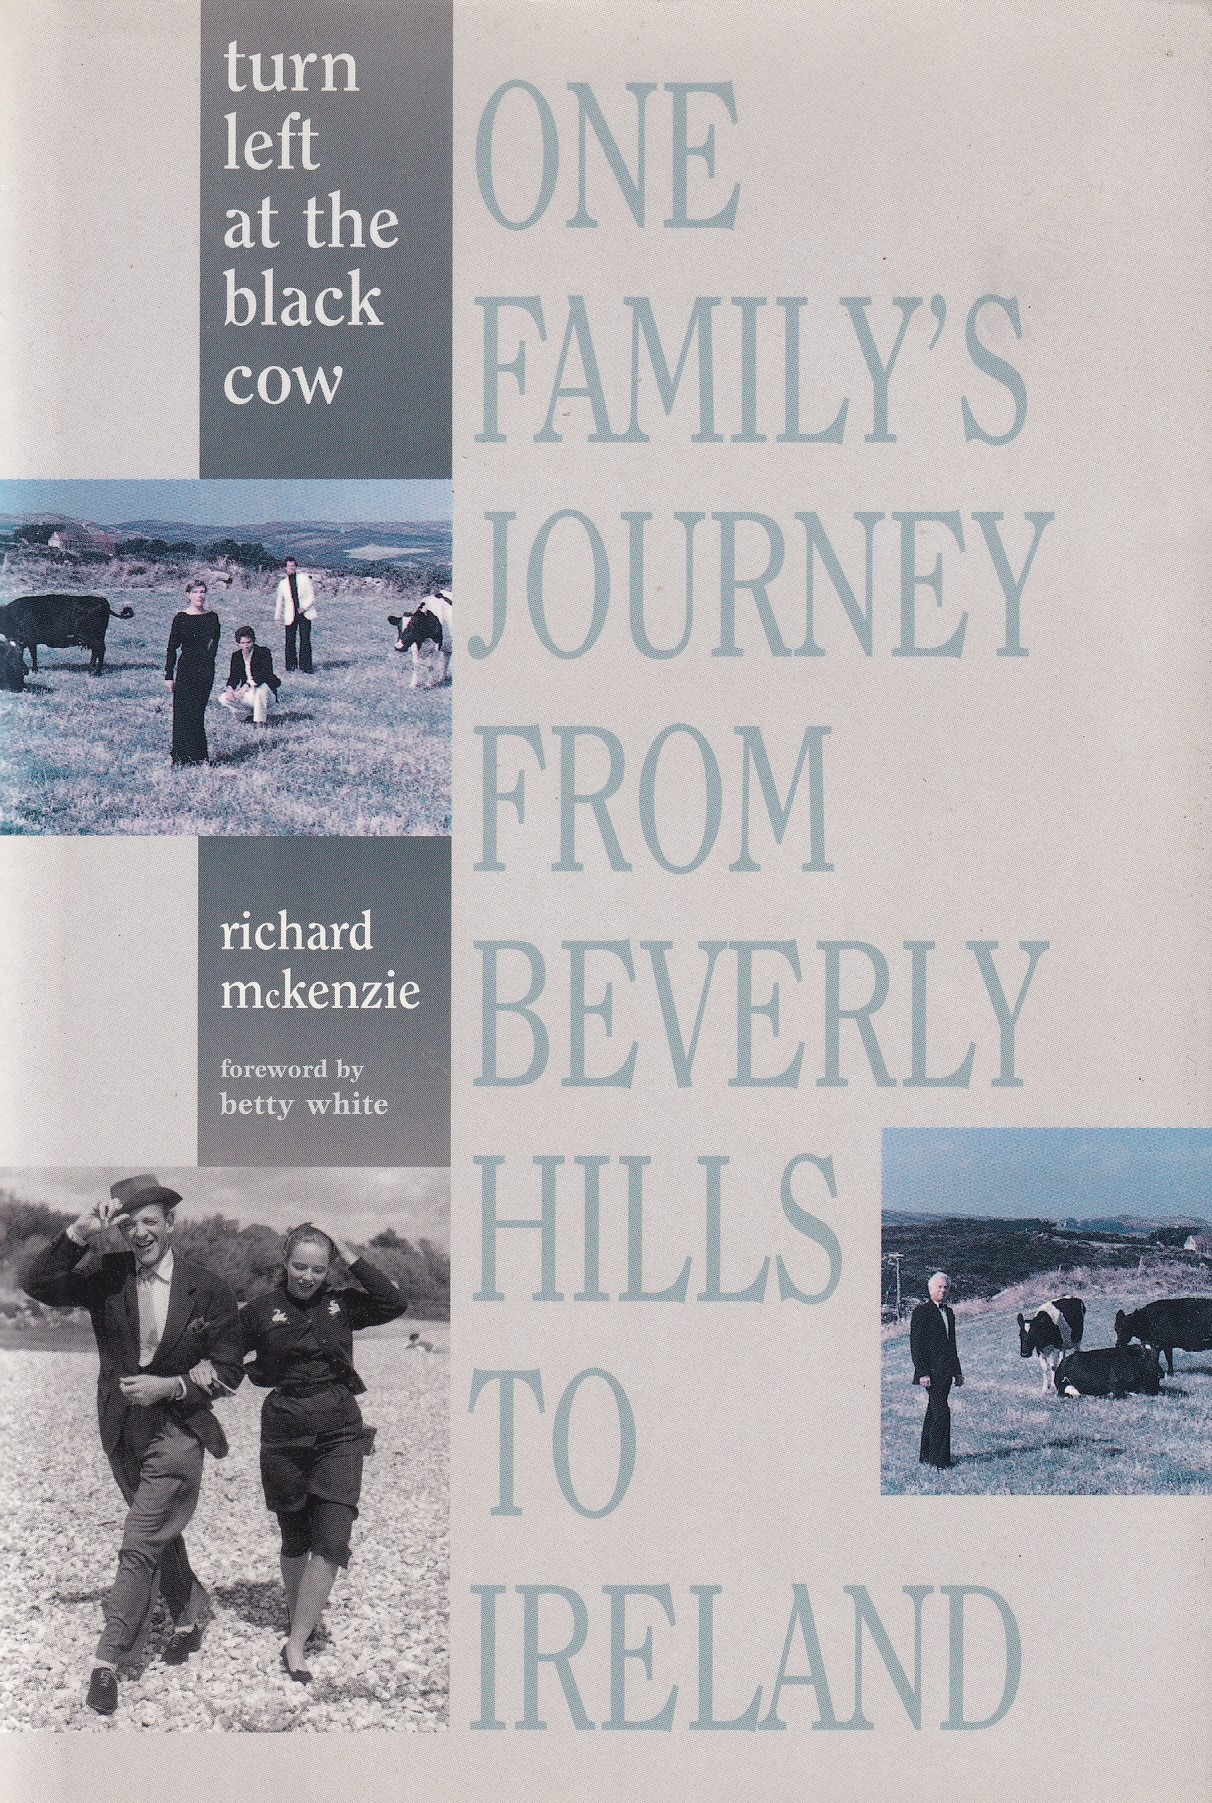 Turn Left at the Black Cow : One Family’s Journey from Beverly Hills to Ireland by McKenzie, Richard